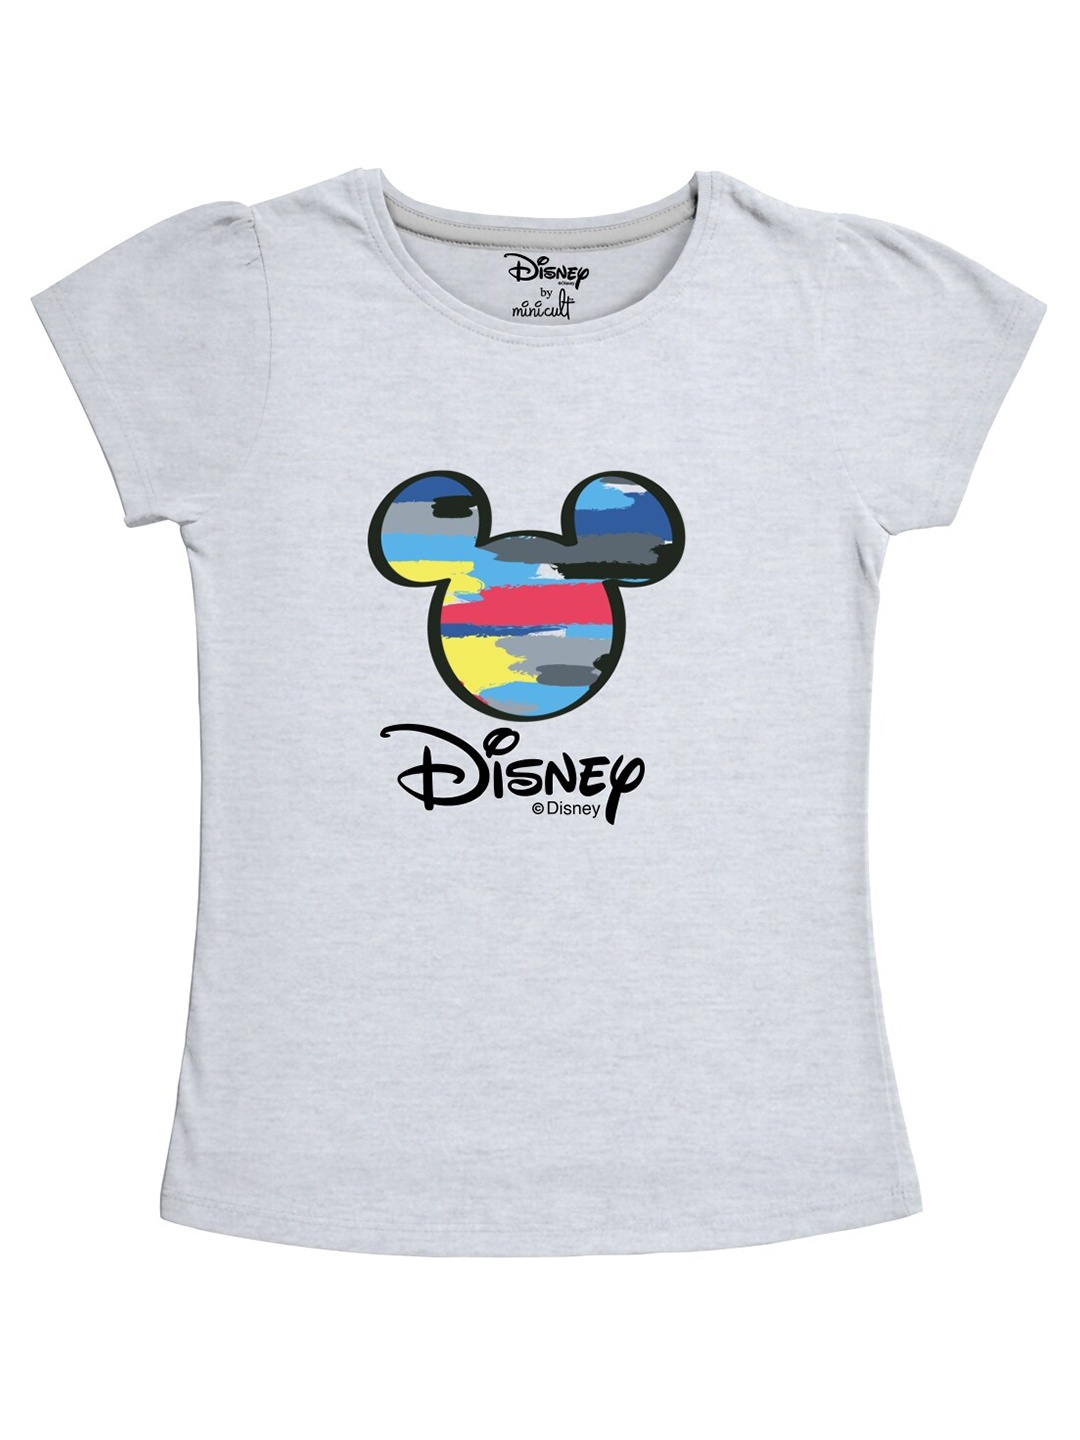 

Minicult Girls Mickey Mouse Printed Cotton T-shirt, Grey